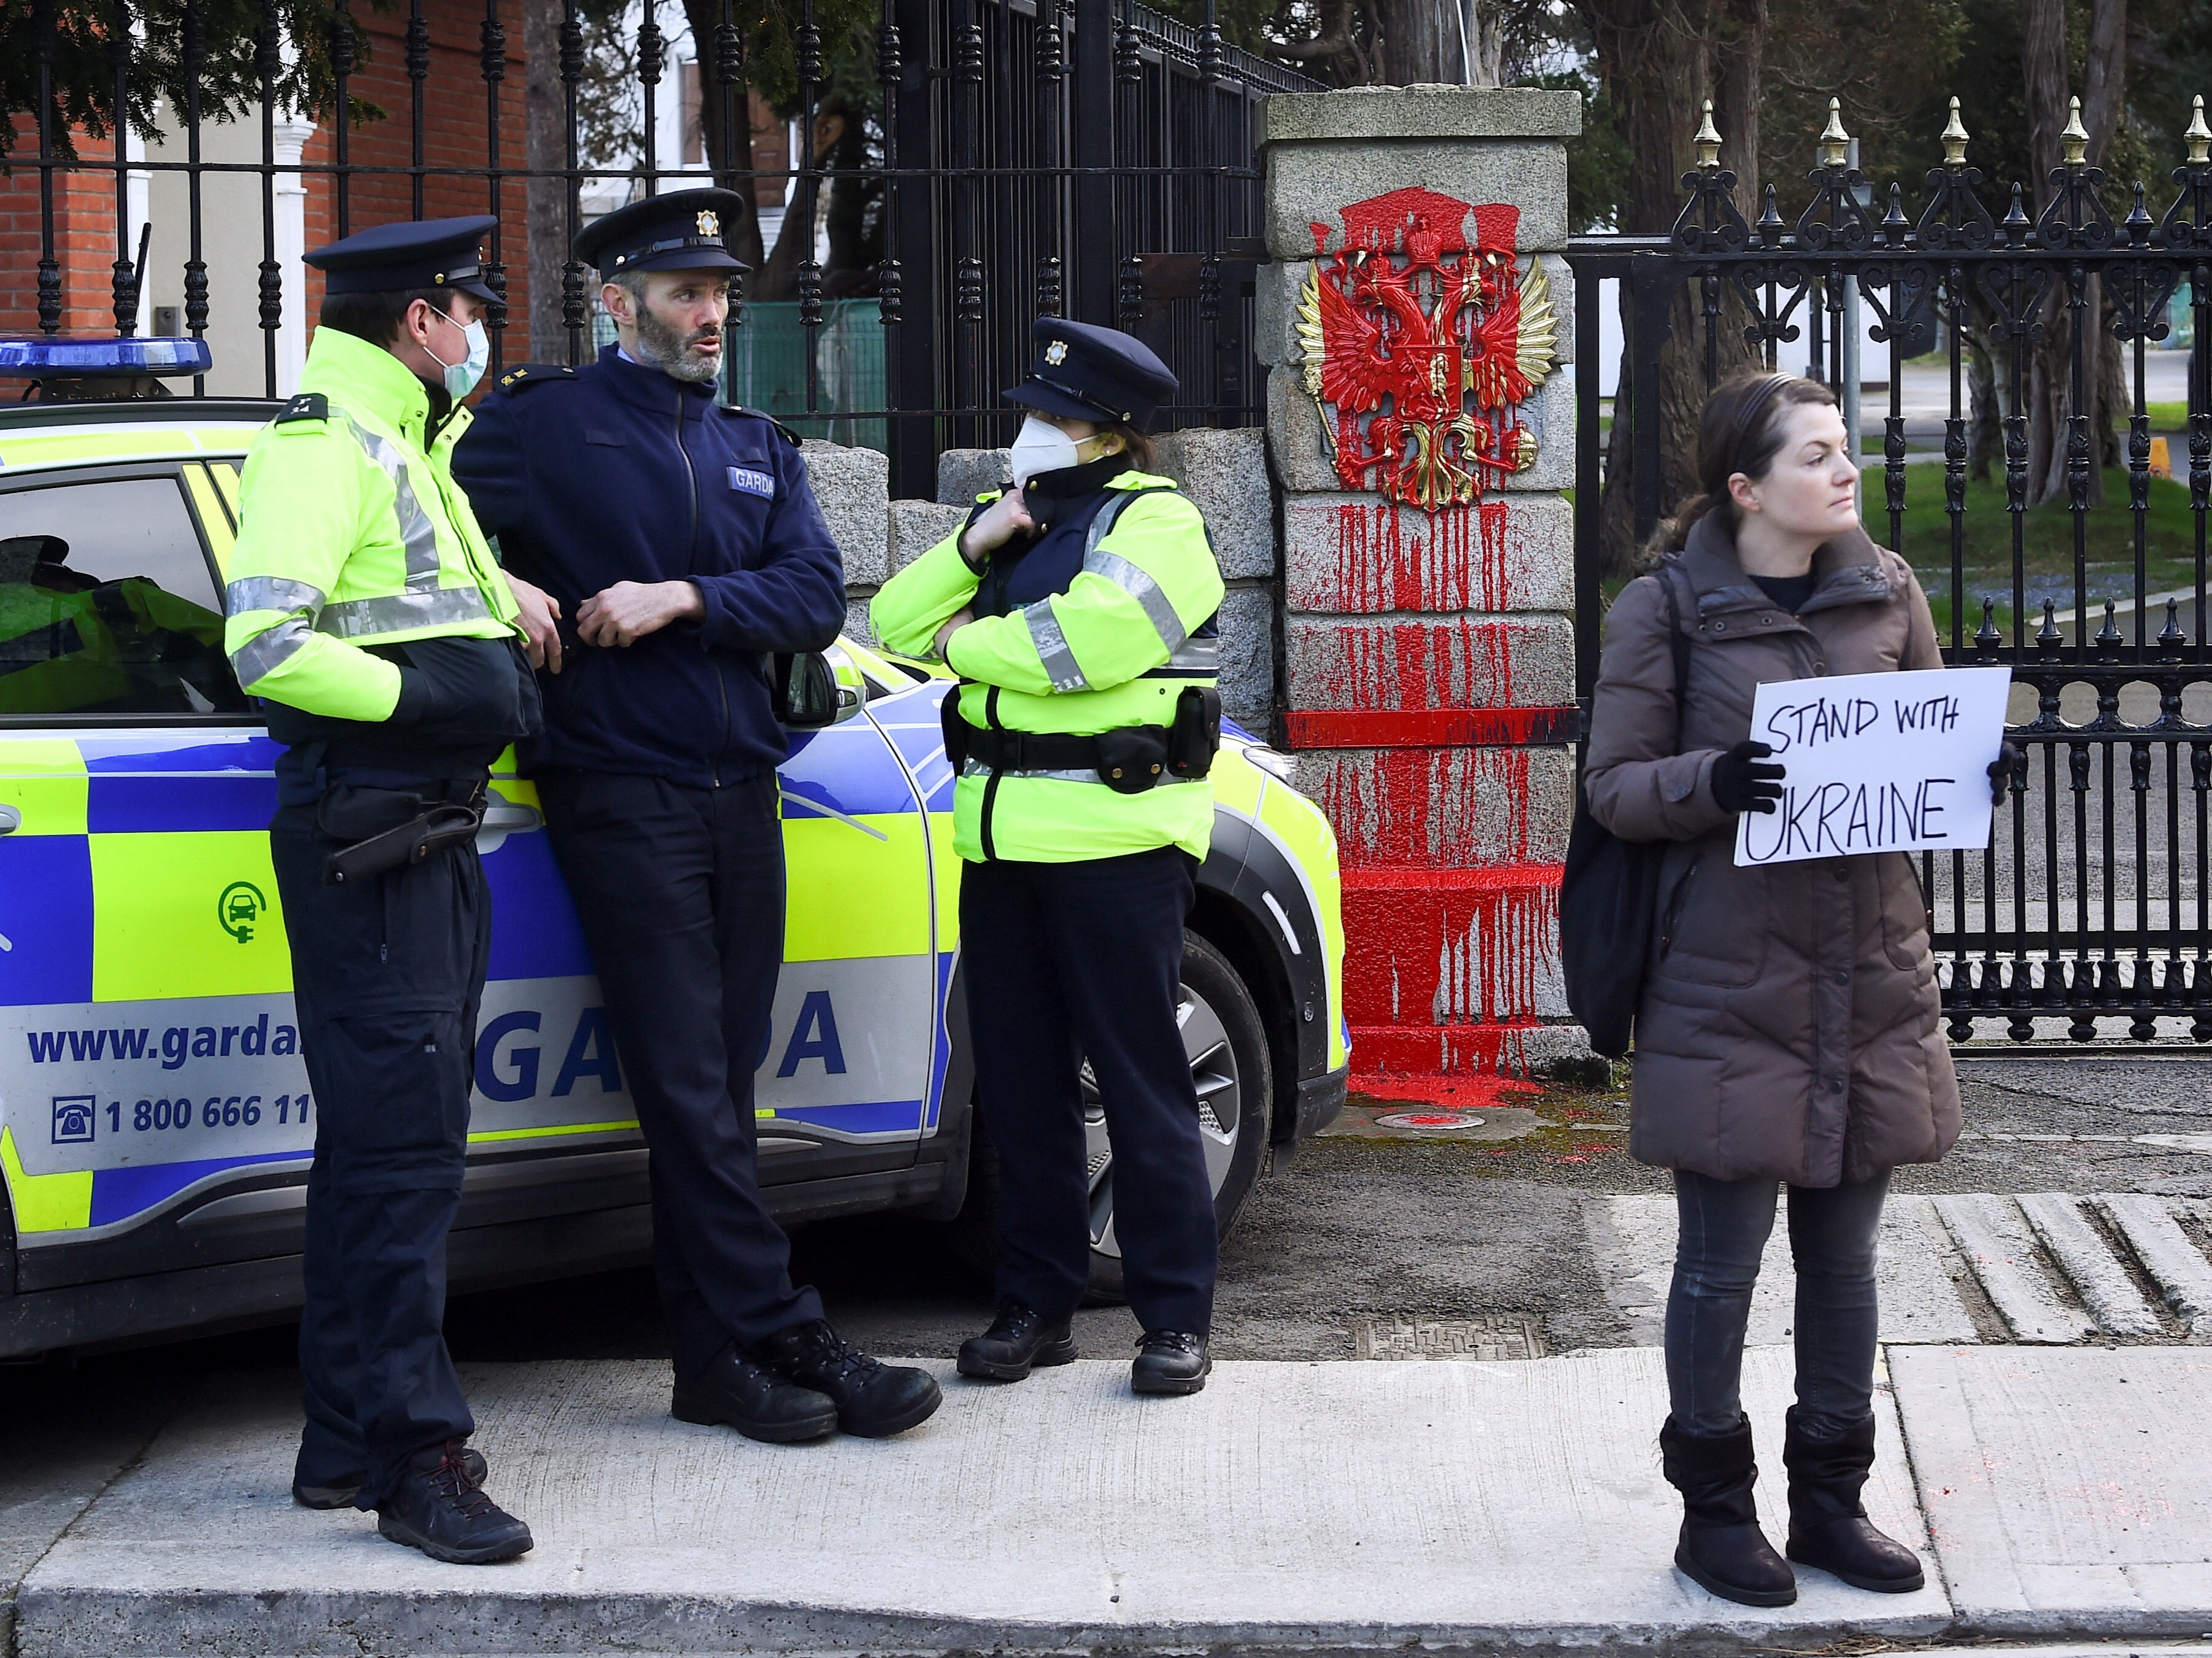 The Russian Embassy in Dublin has been the scene of protests since Russia invaded Ukraine on 24 February